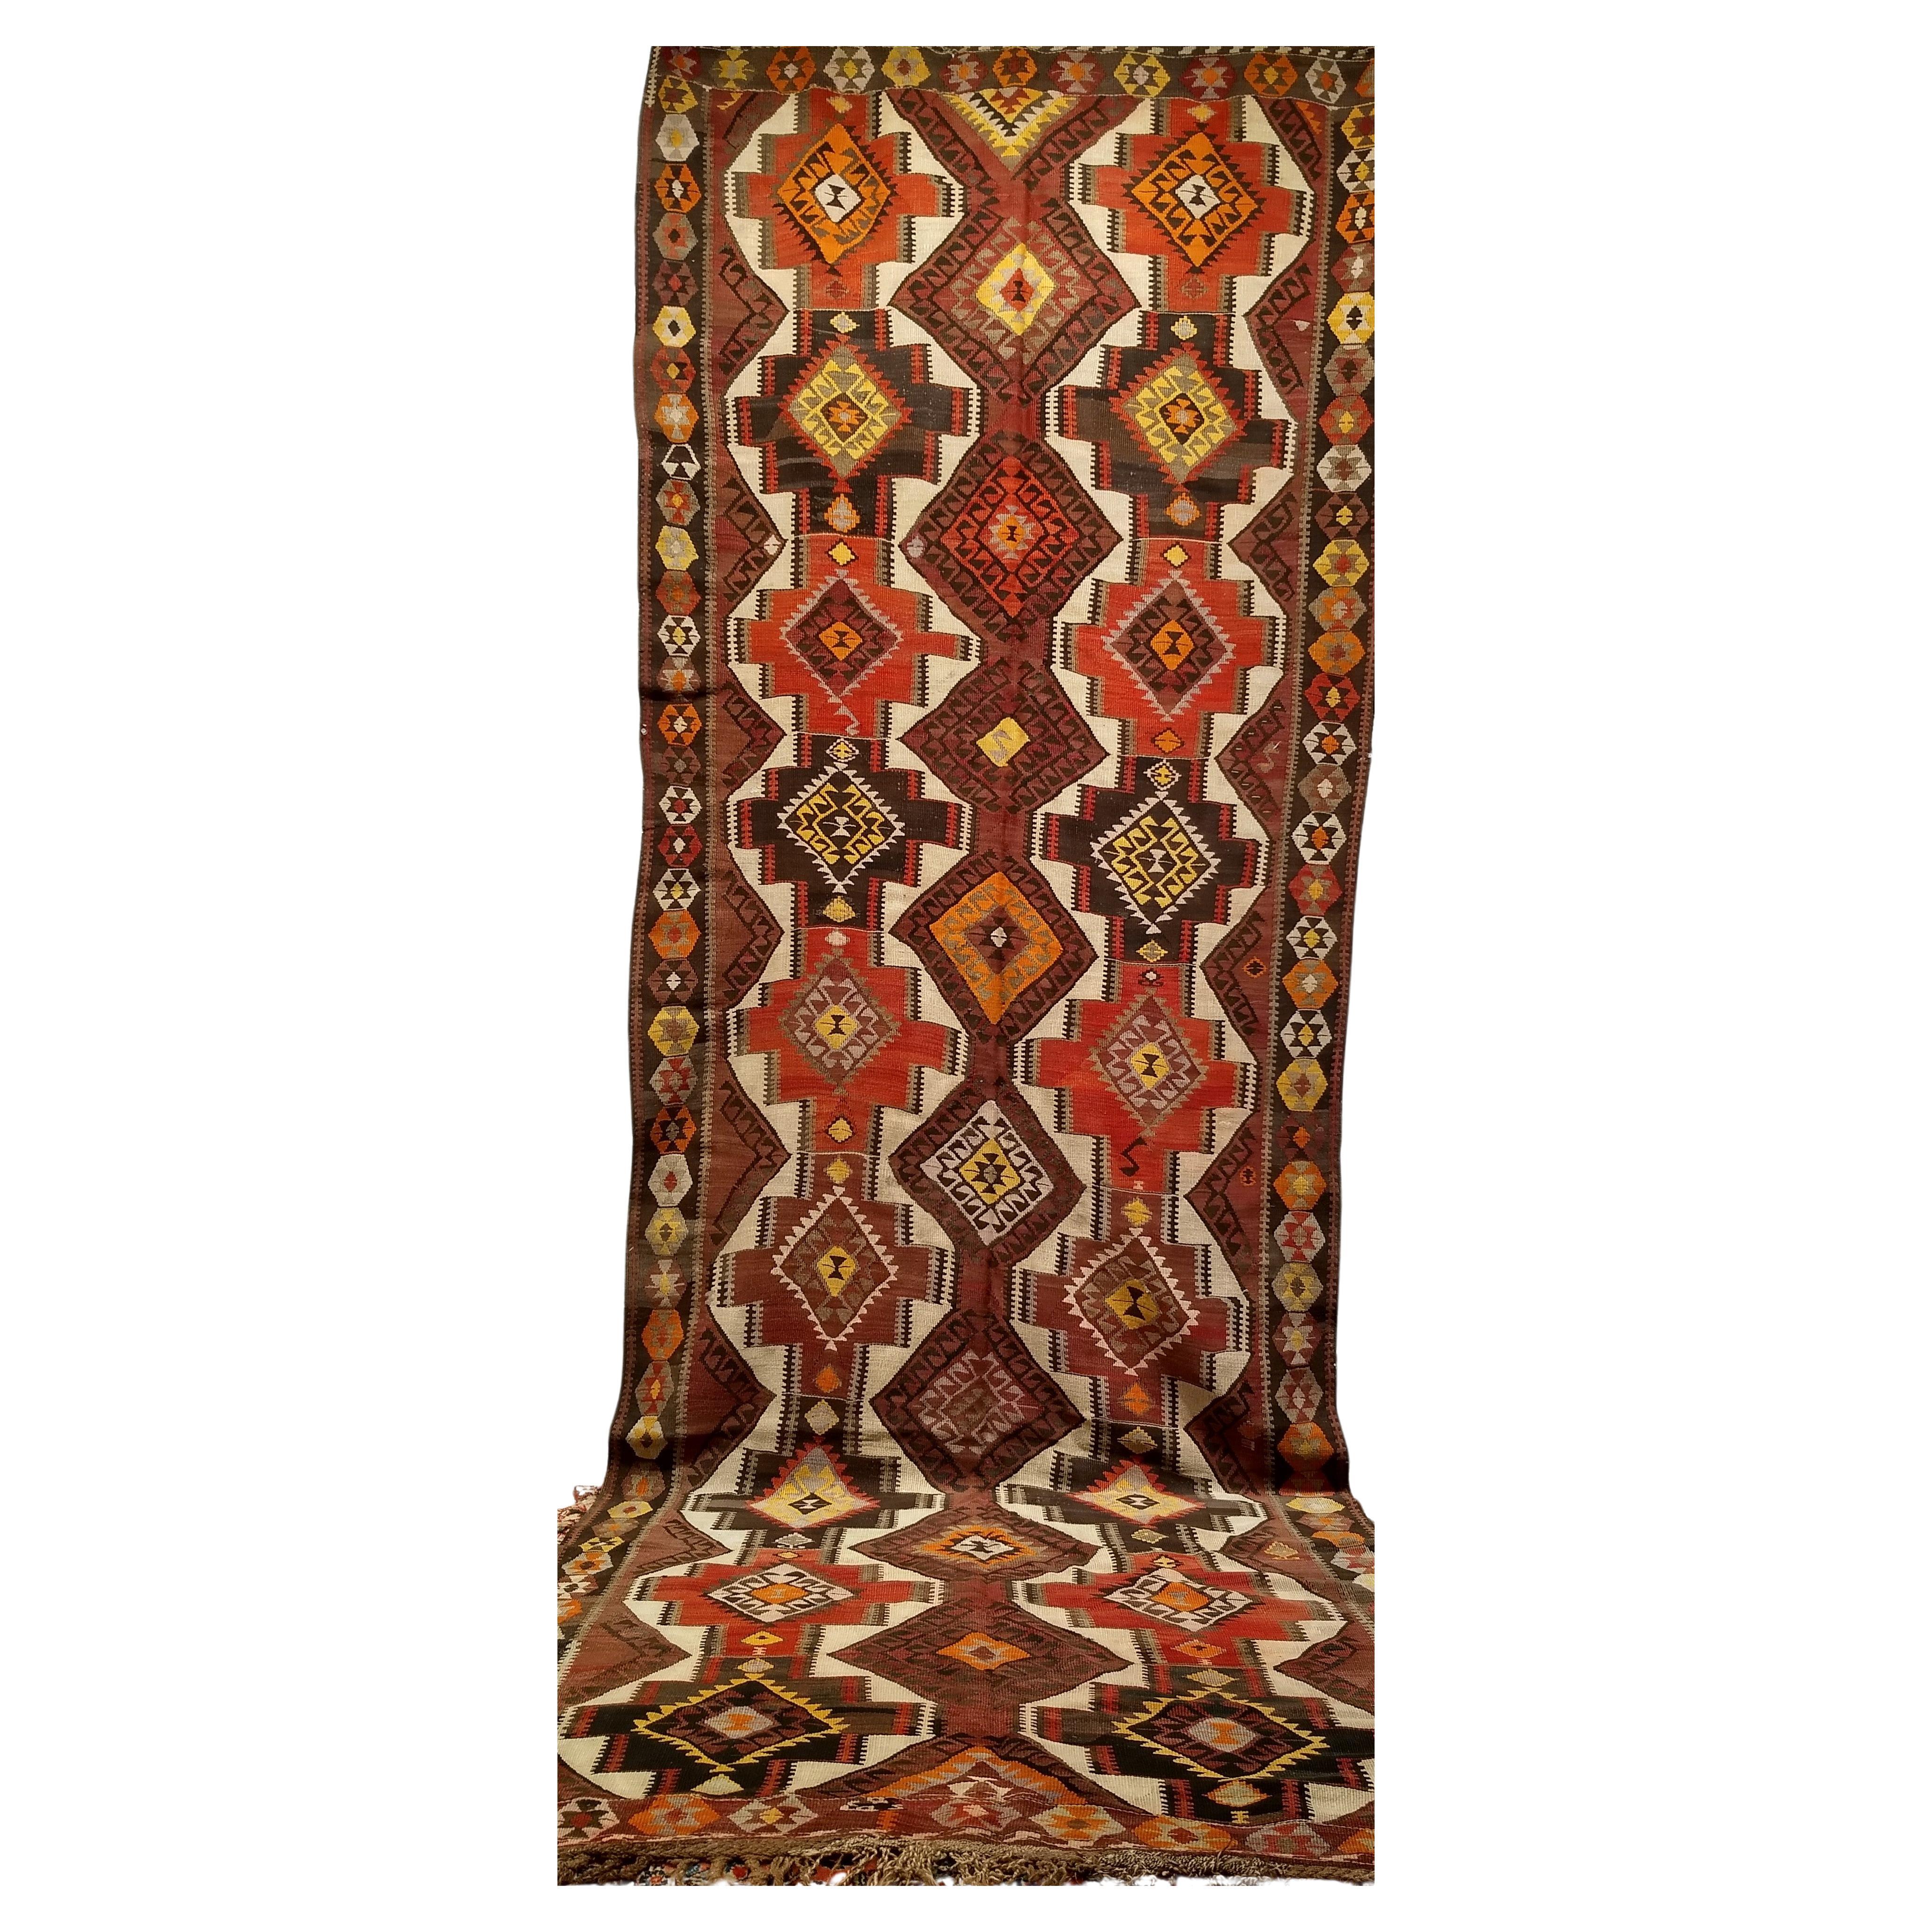 Vintage Kurdish Kilim in Allover Geometric Pattern in Brown, Ivory, Yellow, Red